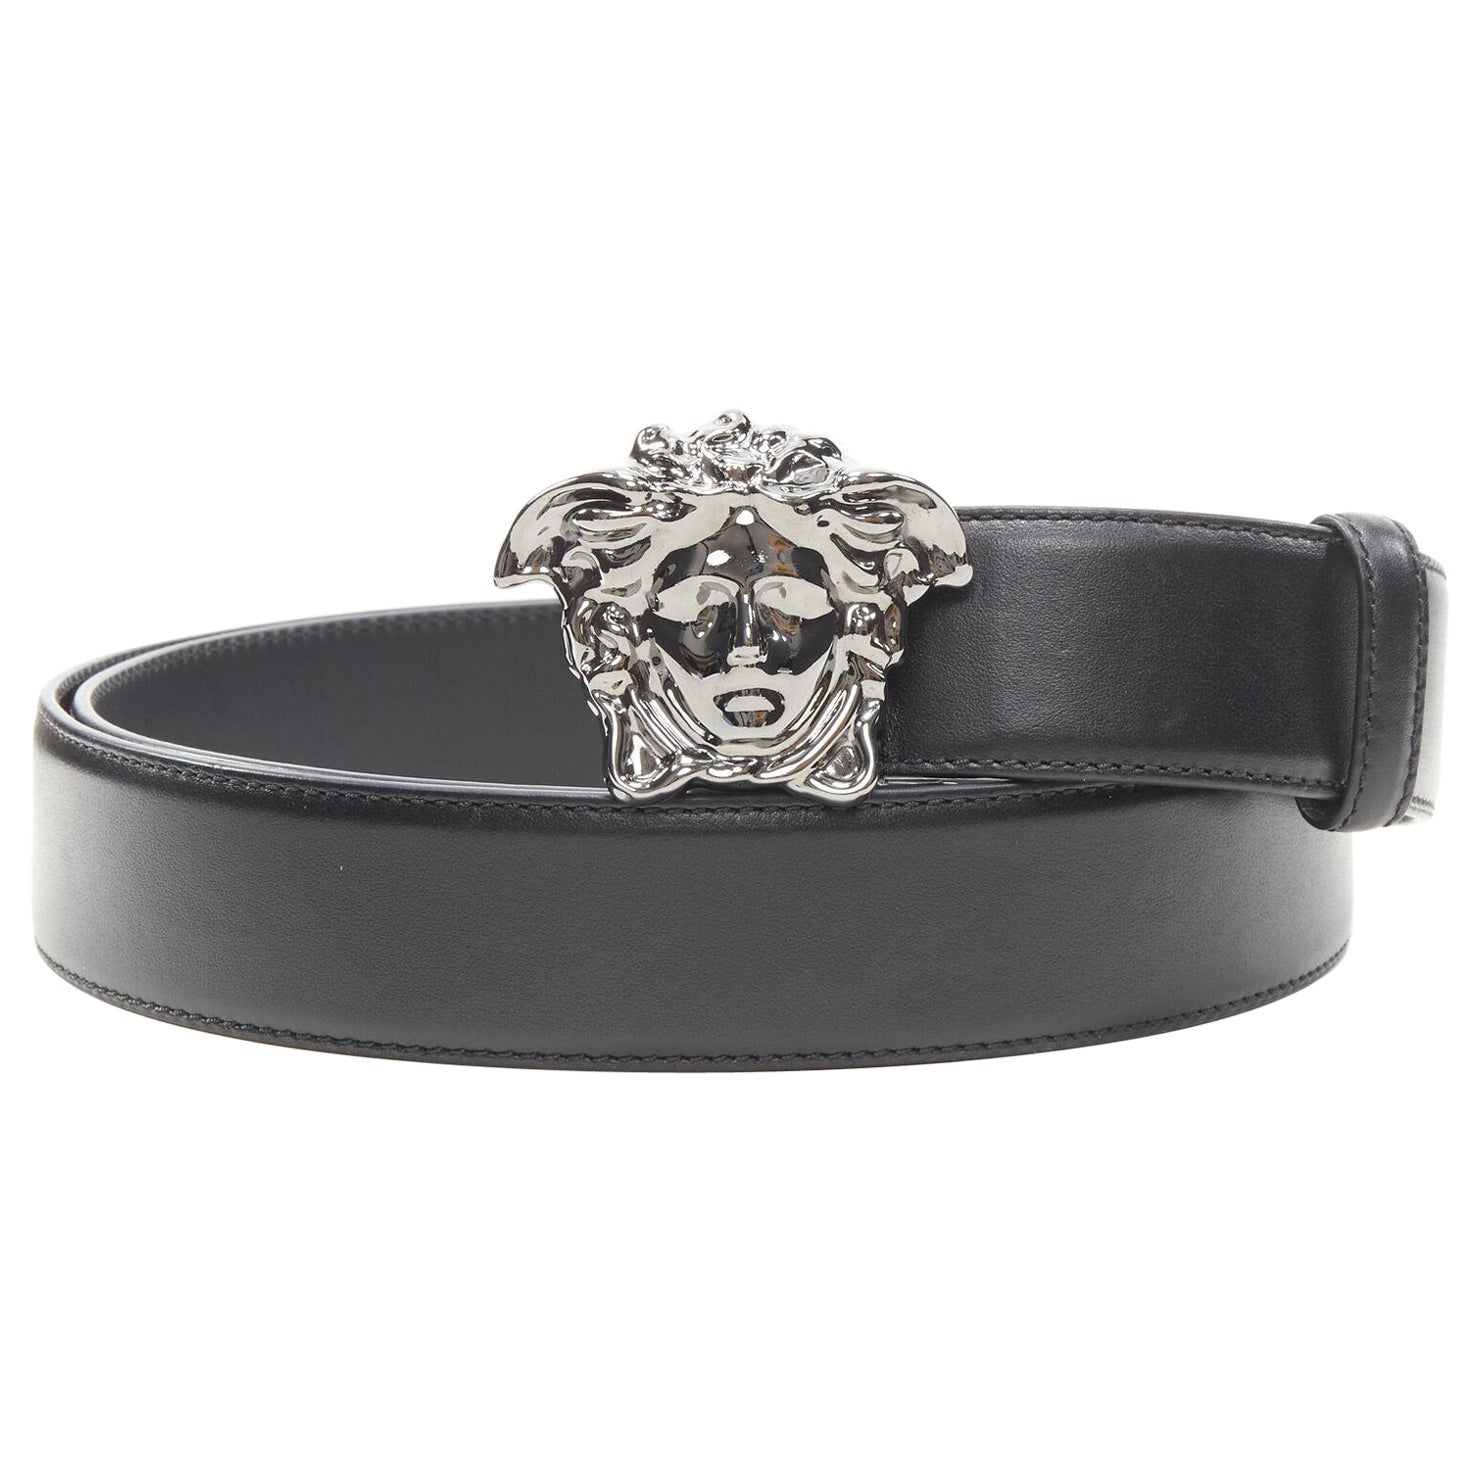 How can I resize a Versace belt?